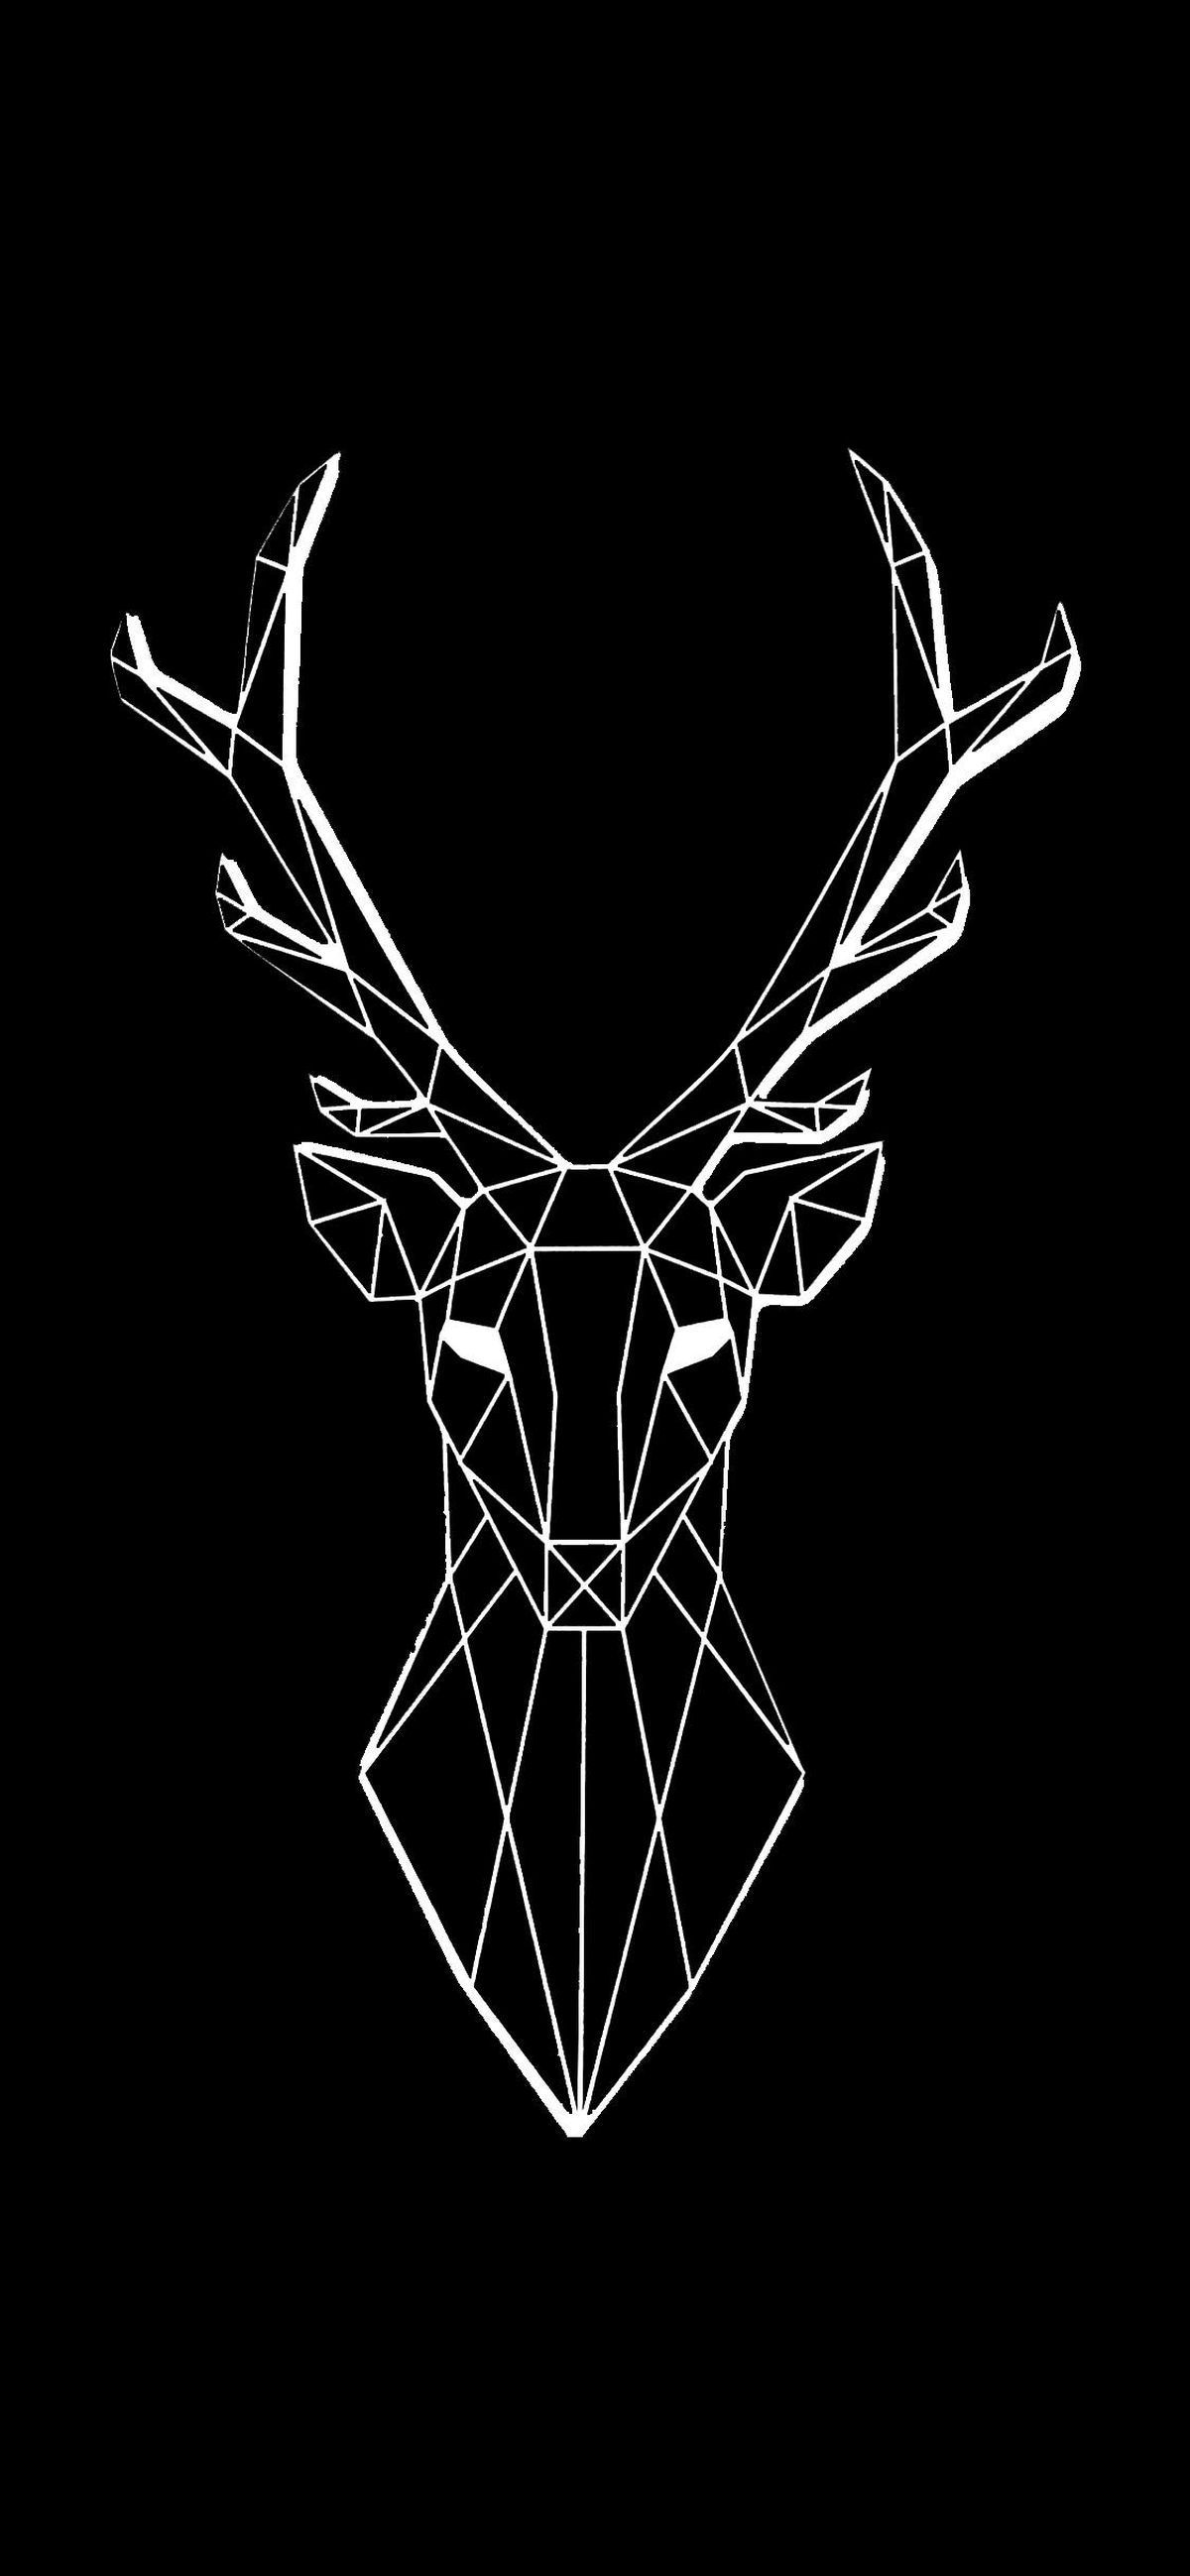 iPhone X Wallpaper: 35 Great Image For An AMOLED Screen. Deer wallpaper, Cool black wallpaper, Black wallpaper iphone